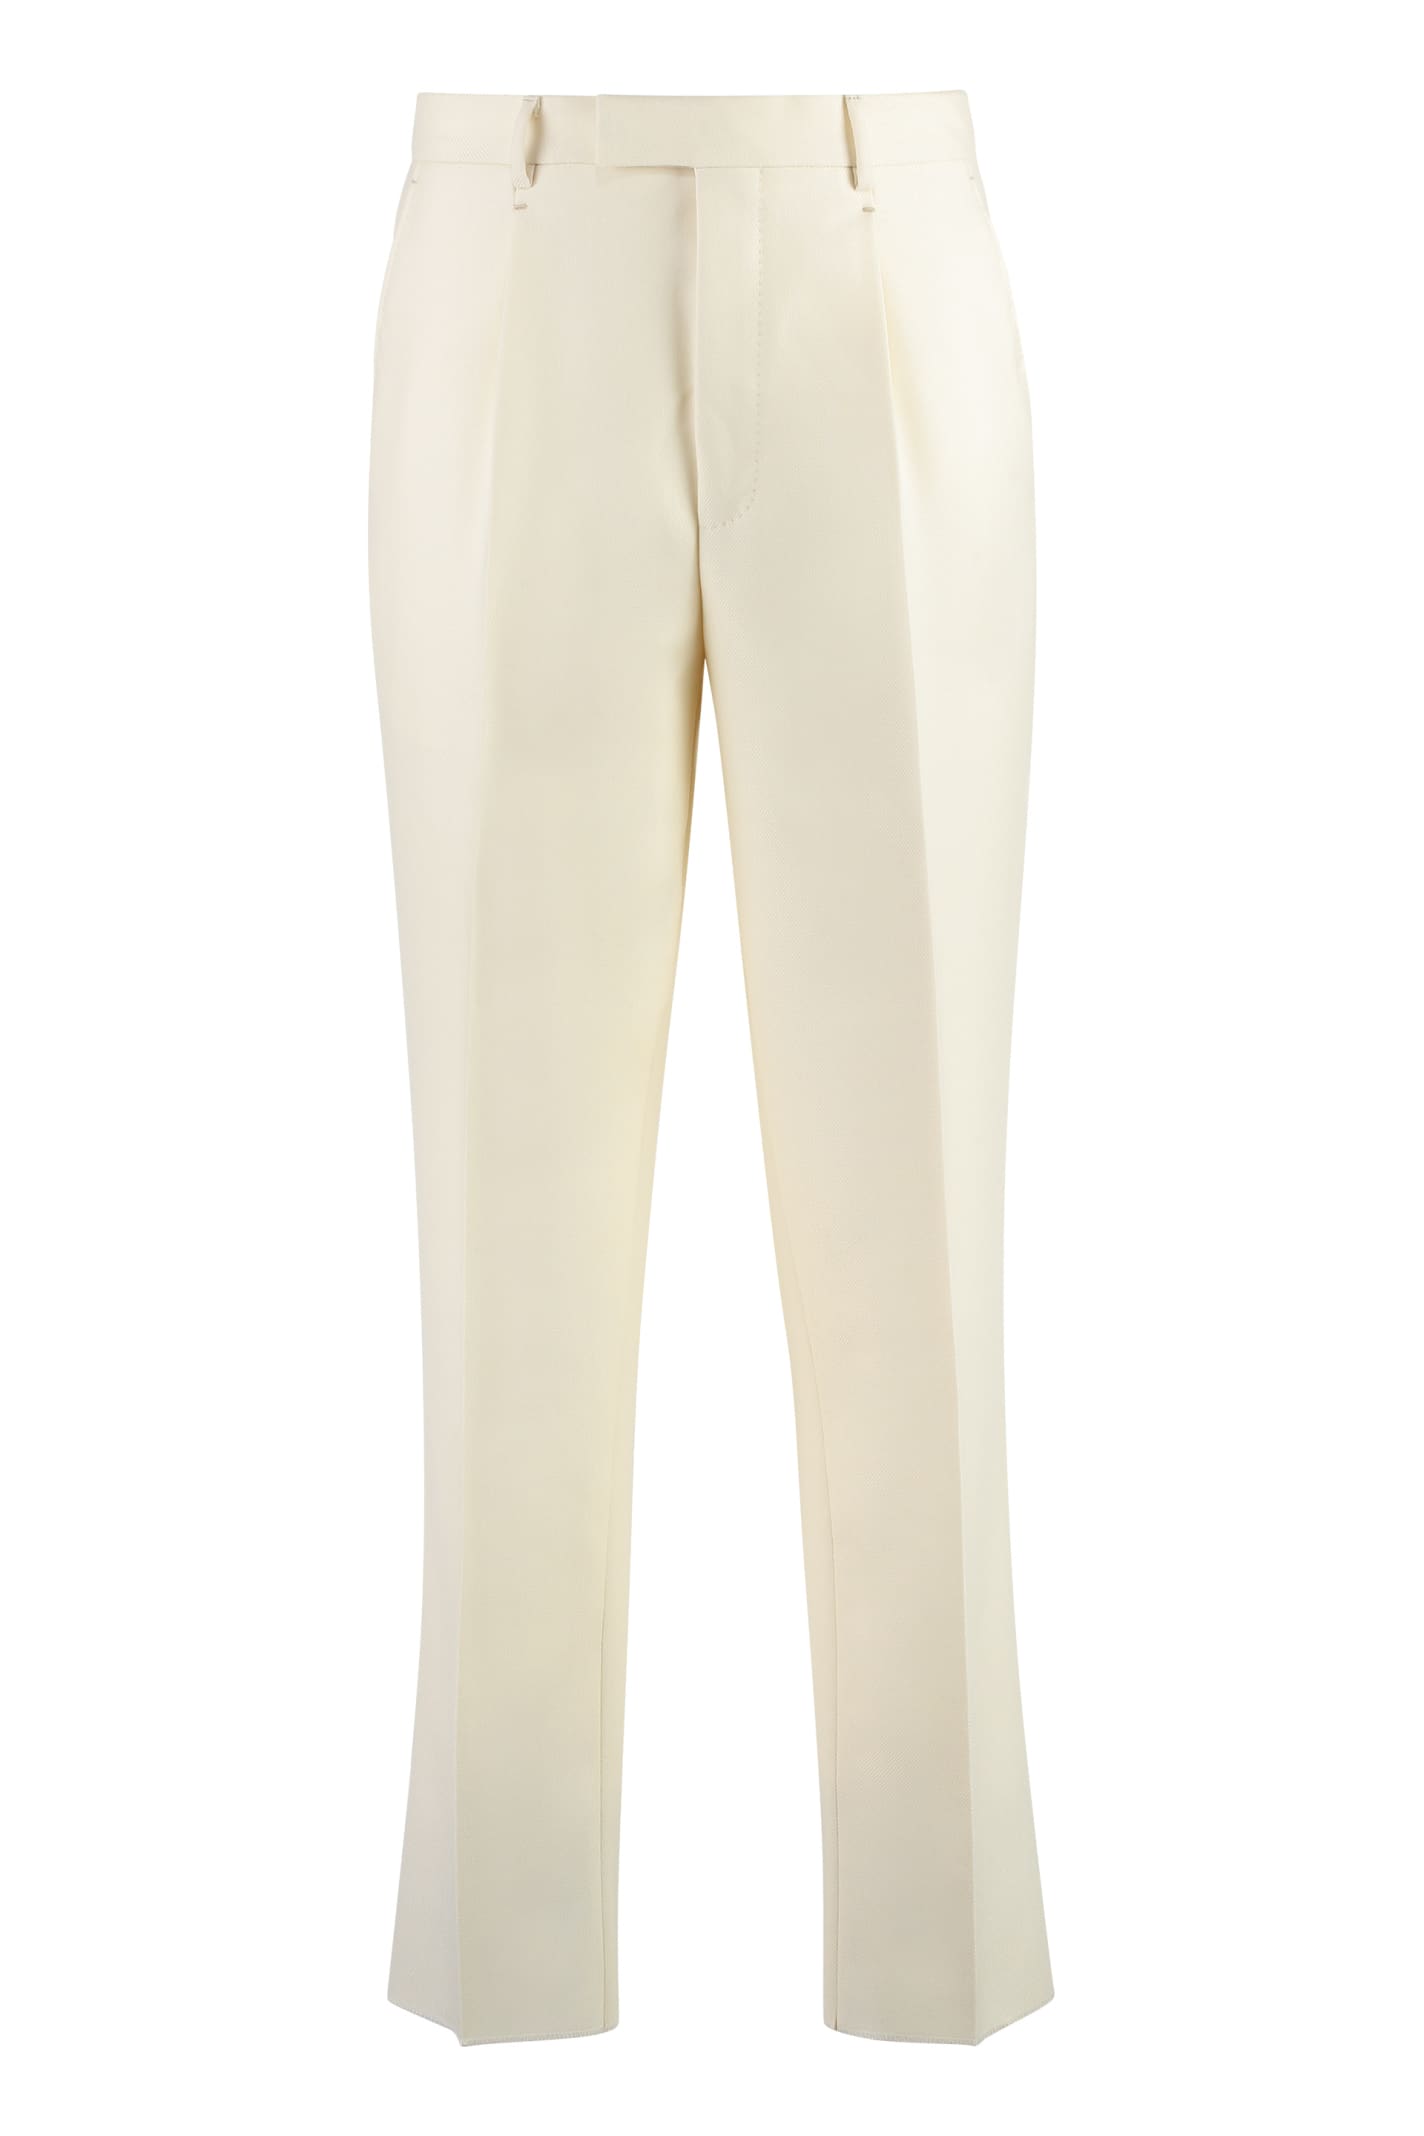 ZEGNA CHINO trousers IN WOOL